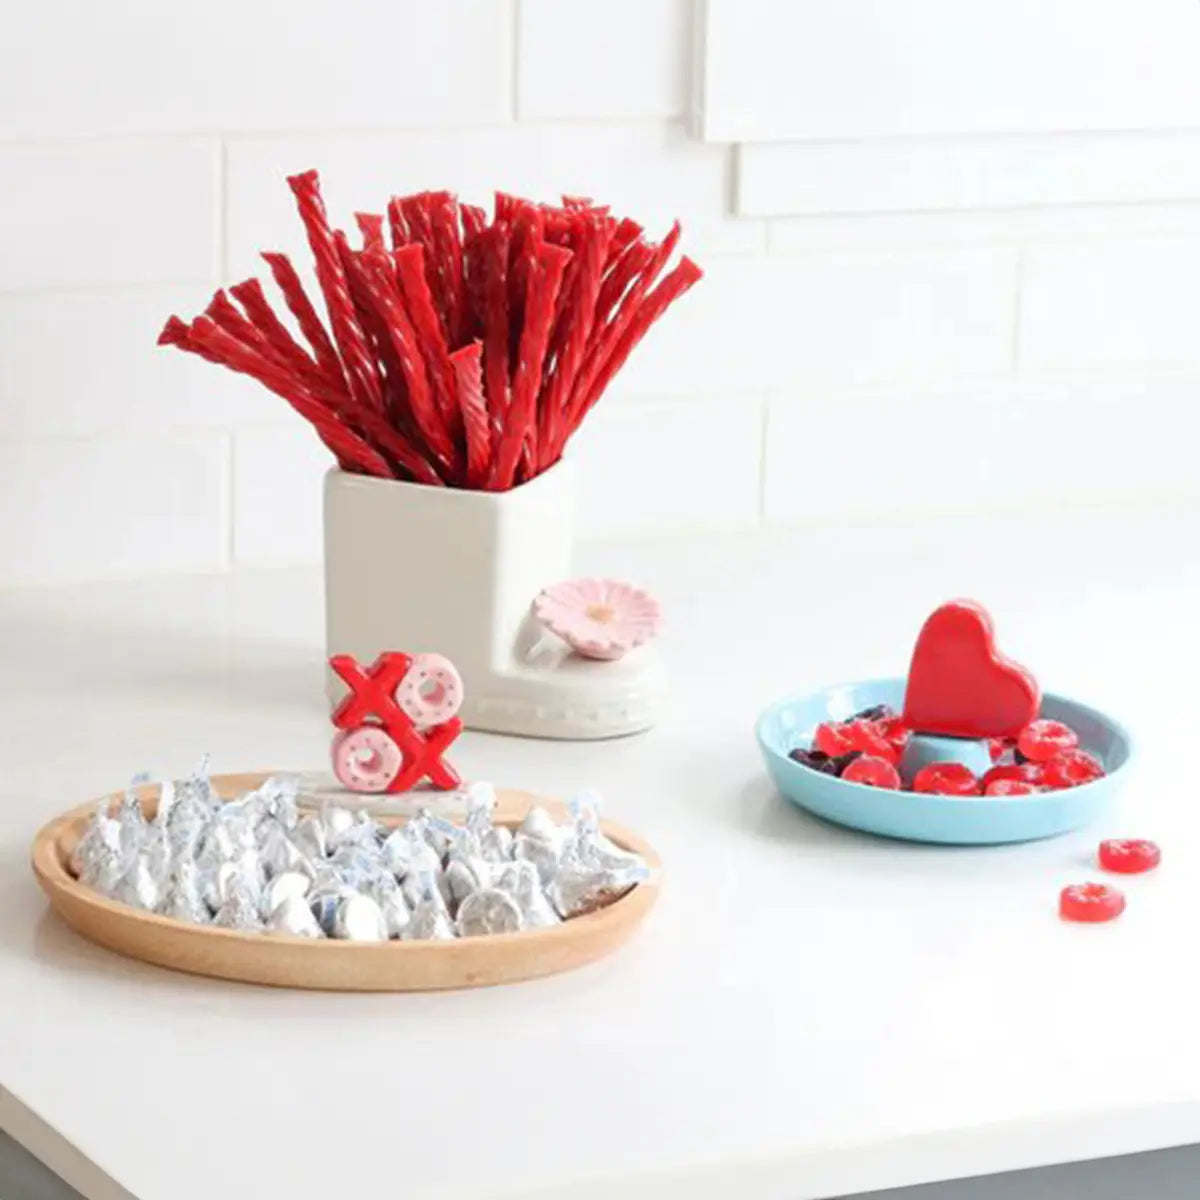 Nora Fleming Be Mine Red Heart Mini with chocolates on the table